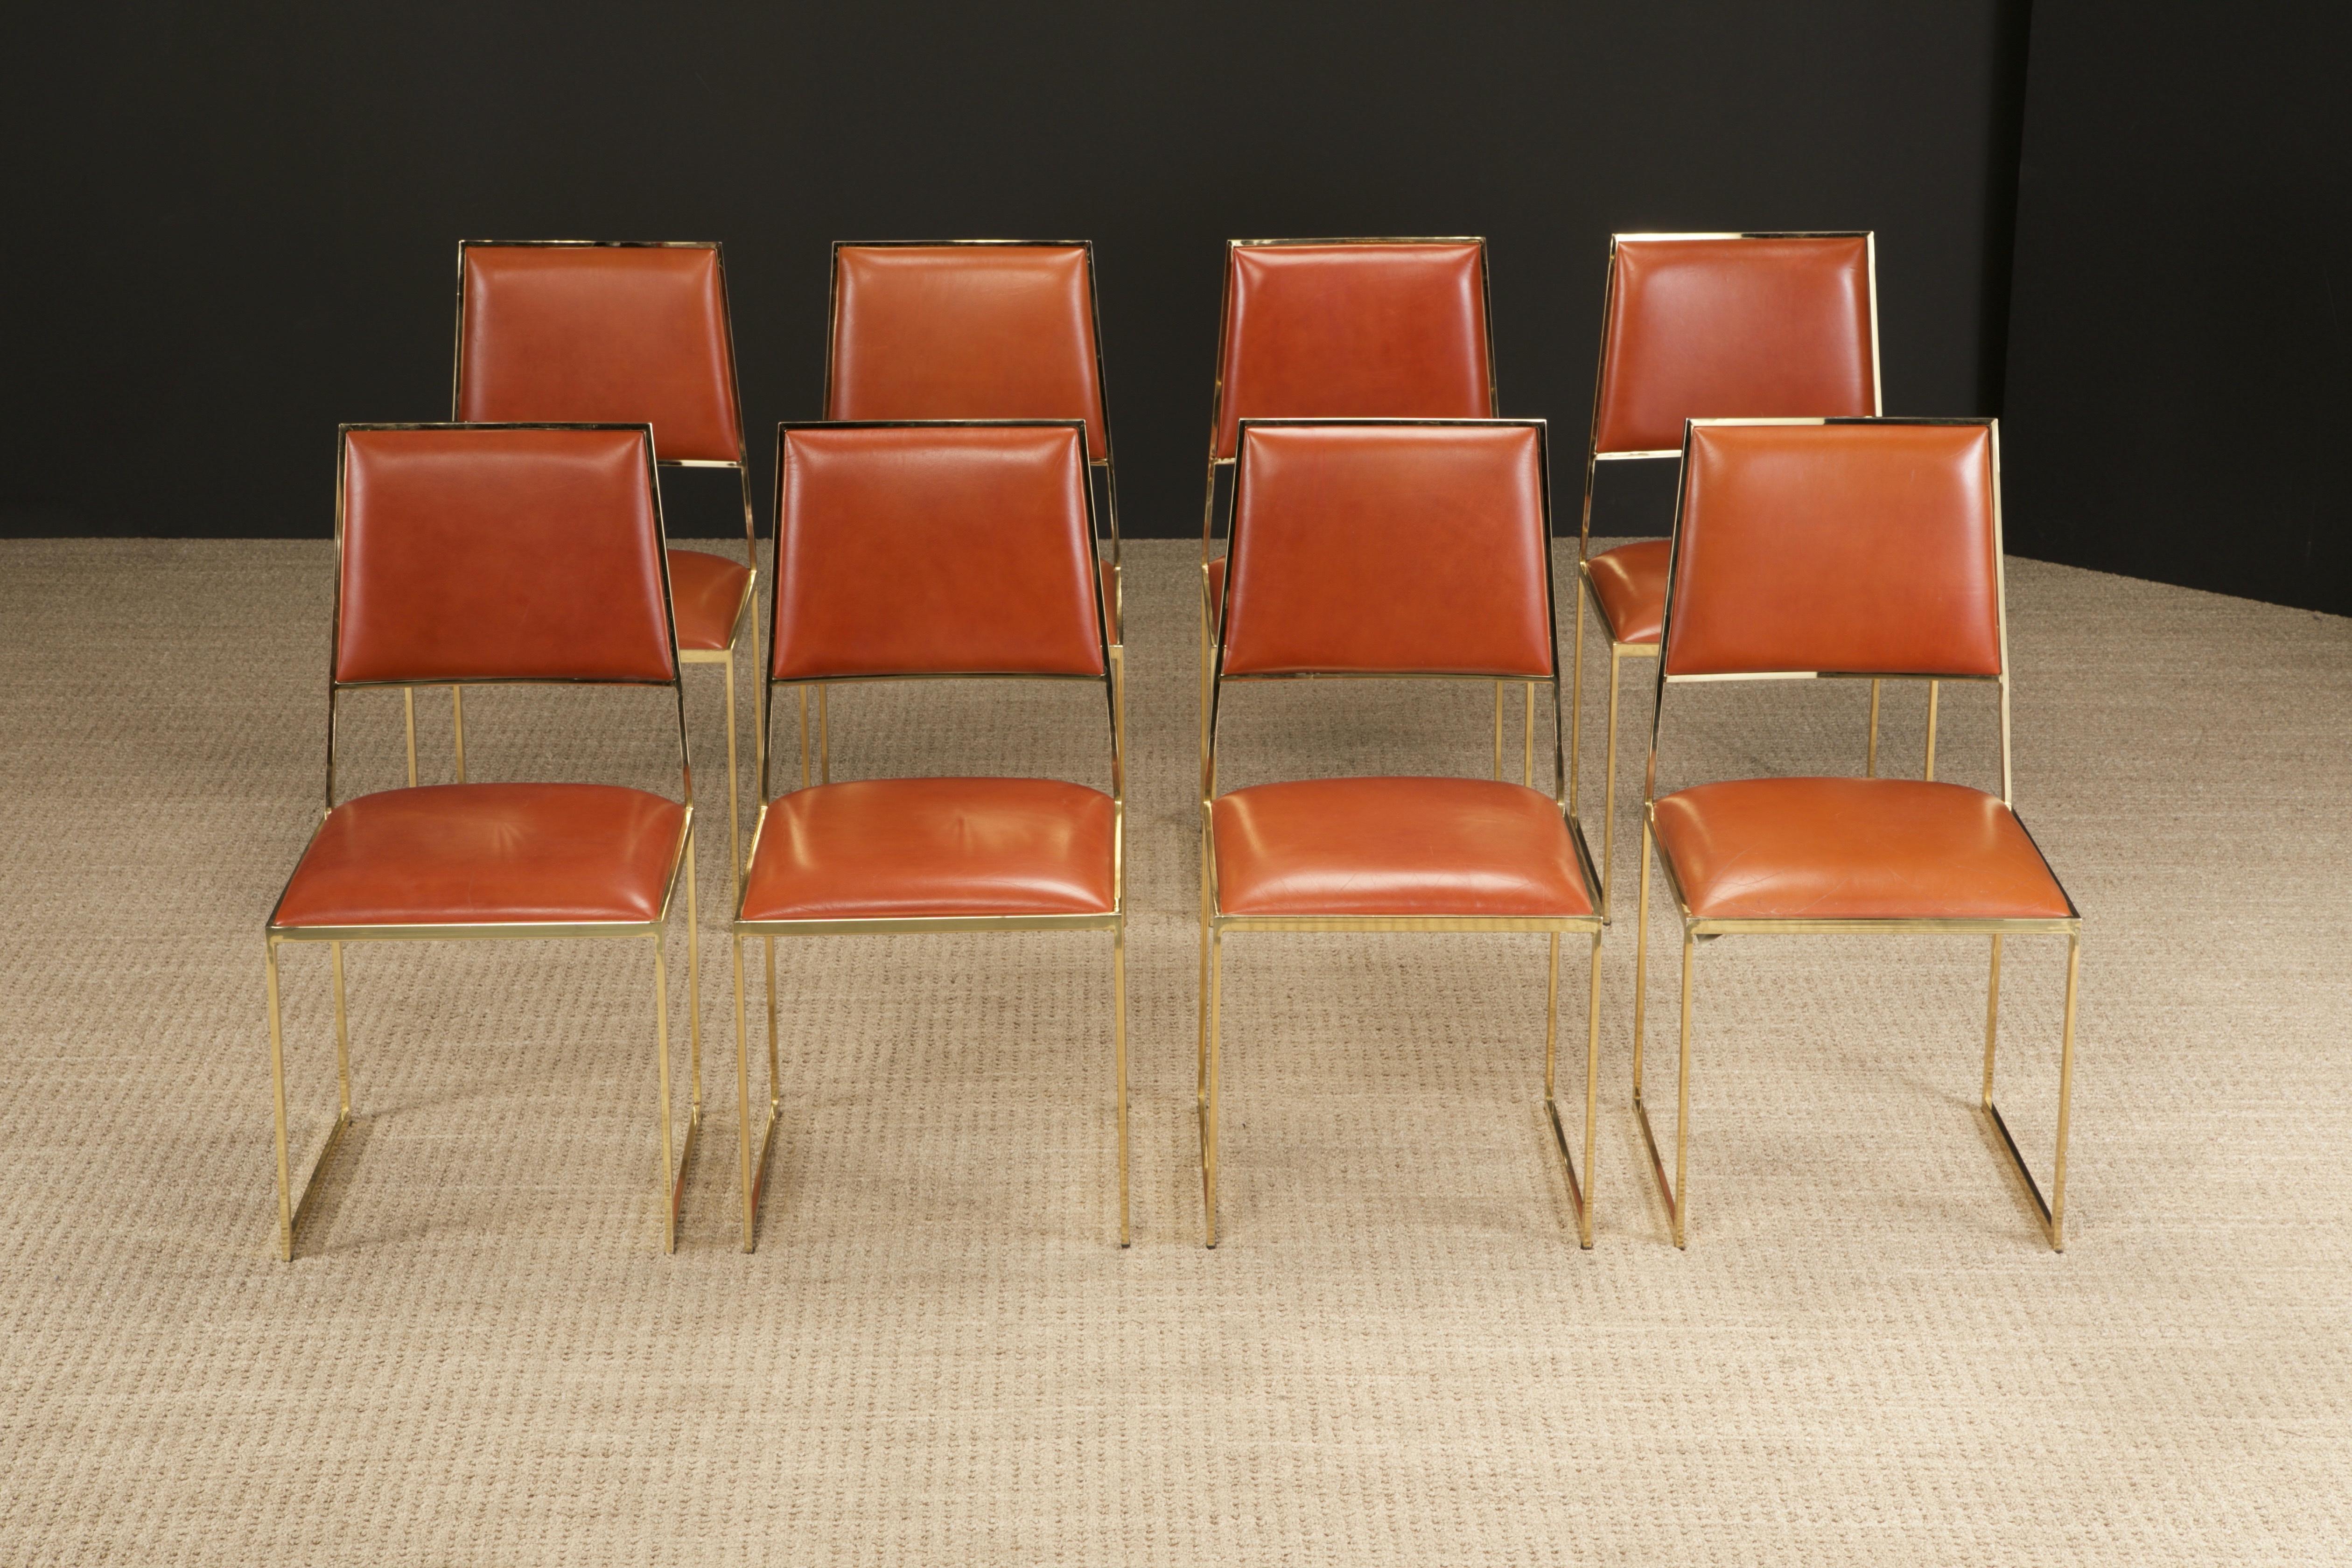 Modern Willy Rizzo for Cidue Dining Chairs in Brass and Cognac Leather, c 1970, Signed